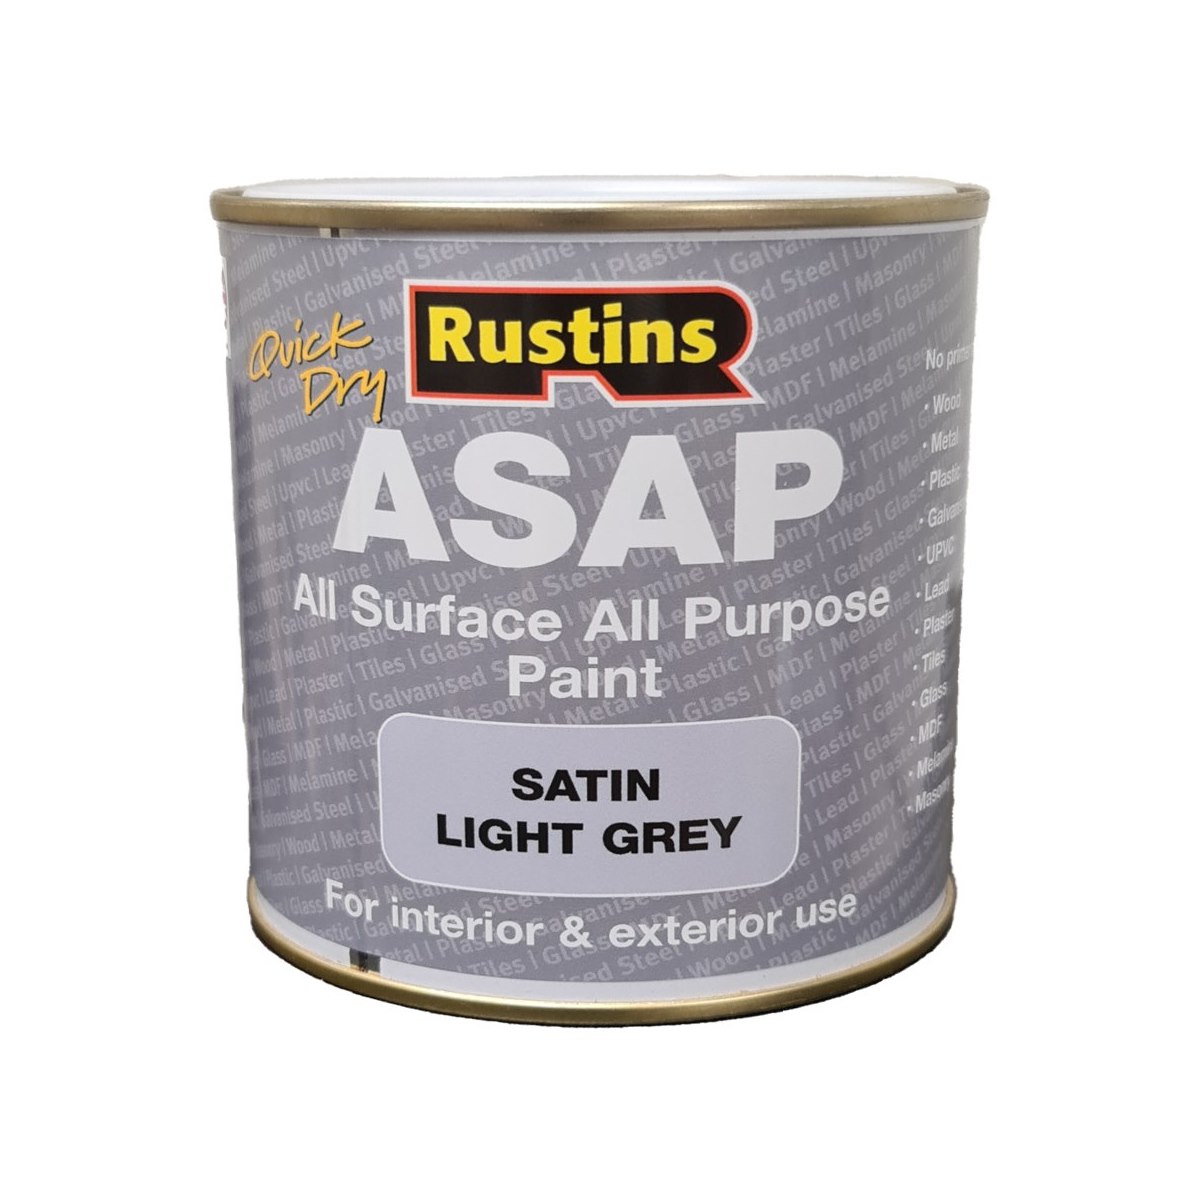 Rustins Quick Dry All Surface All Purpose Paint (ASAP) Light Grey 500ml